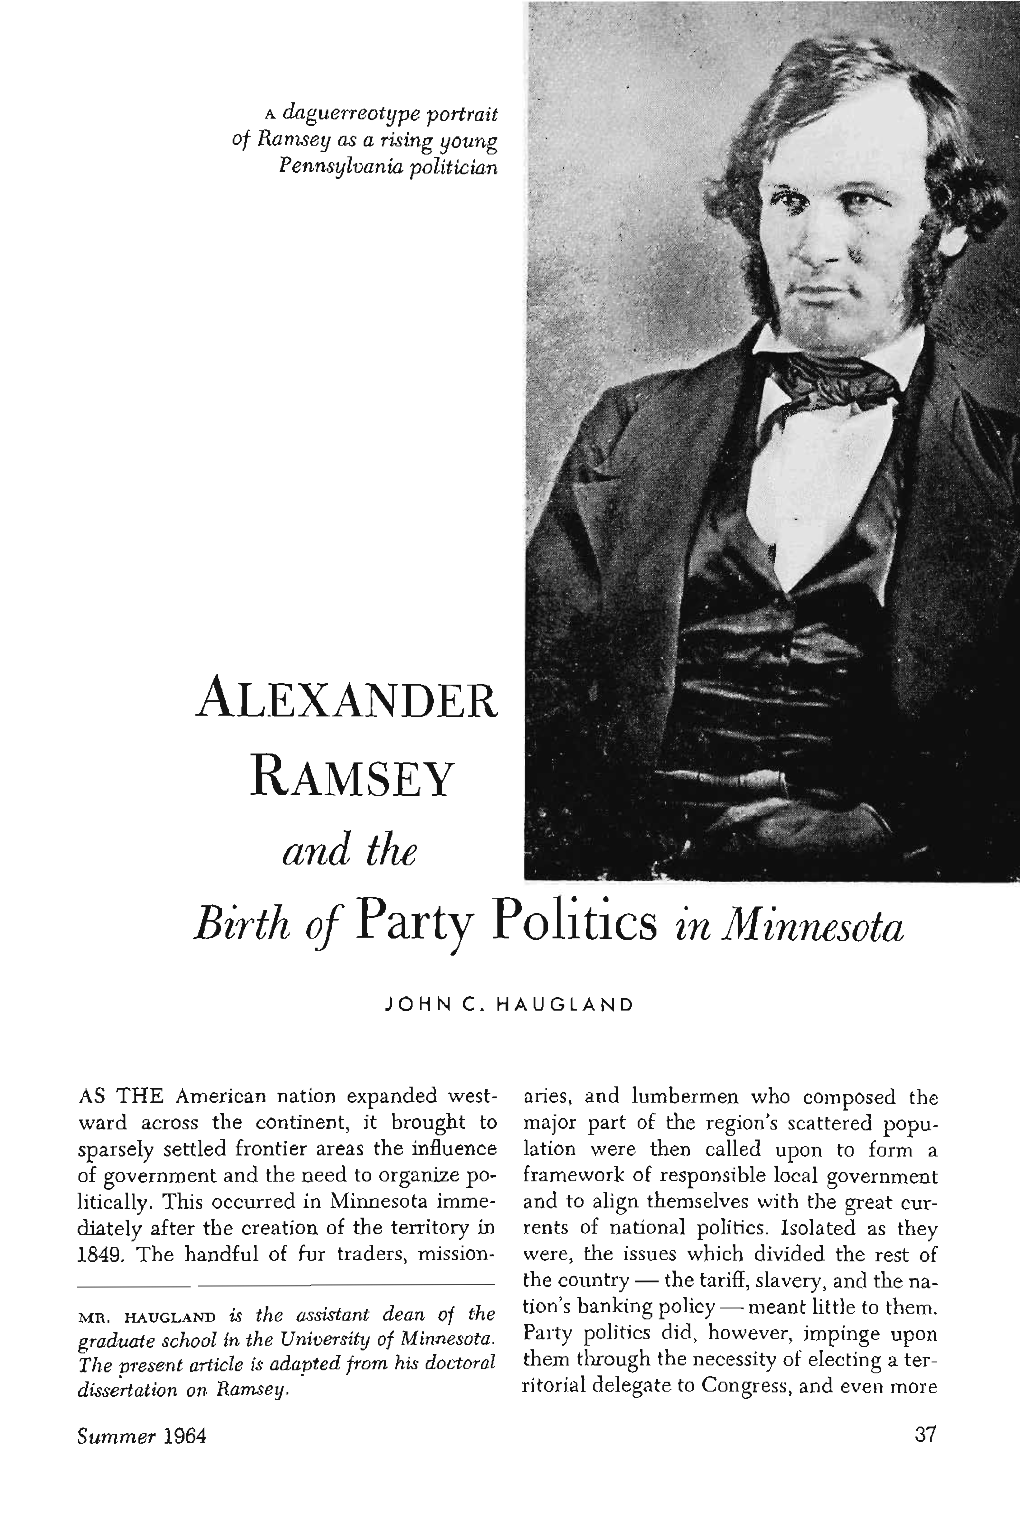 Alexander Ramsey and the Birth of Party Politics in Minnesota